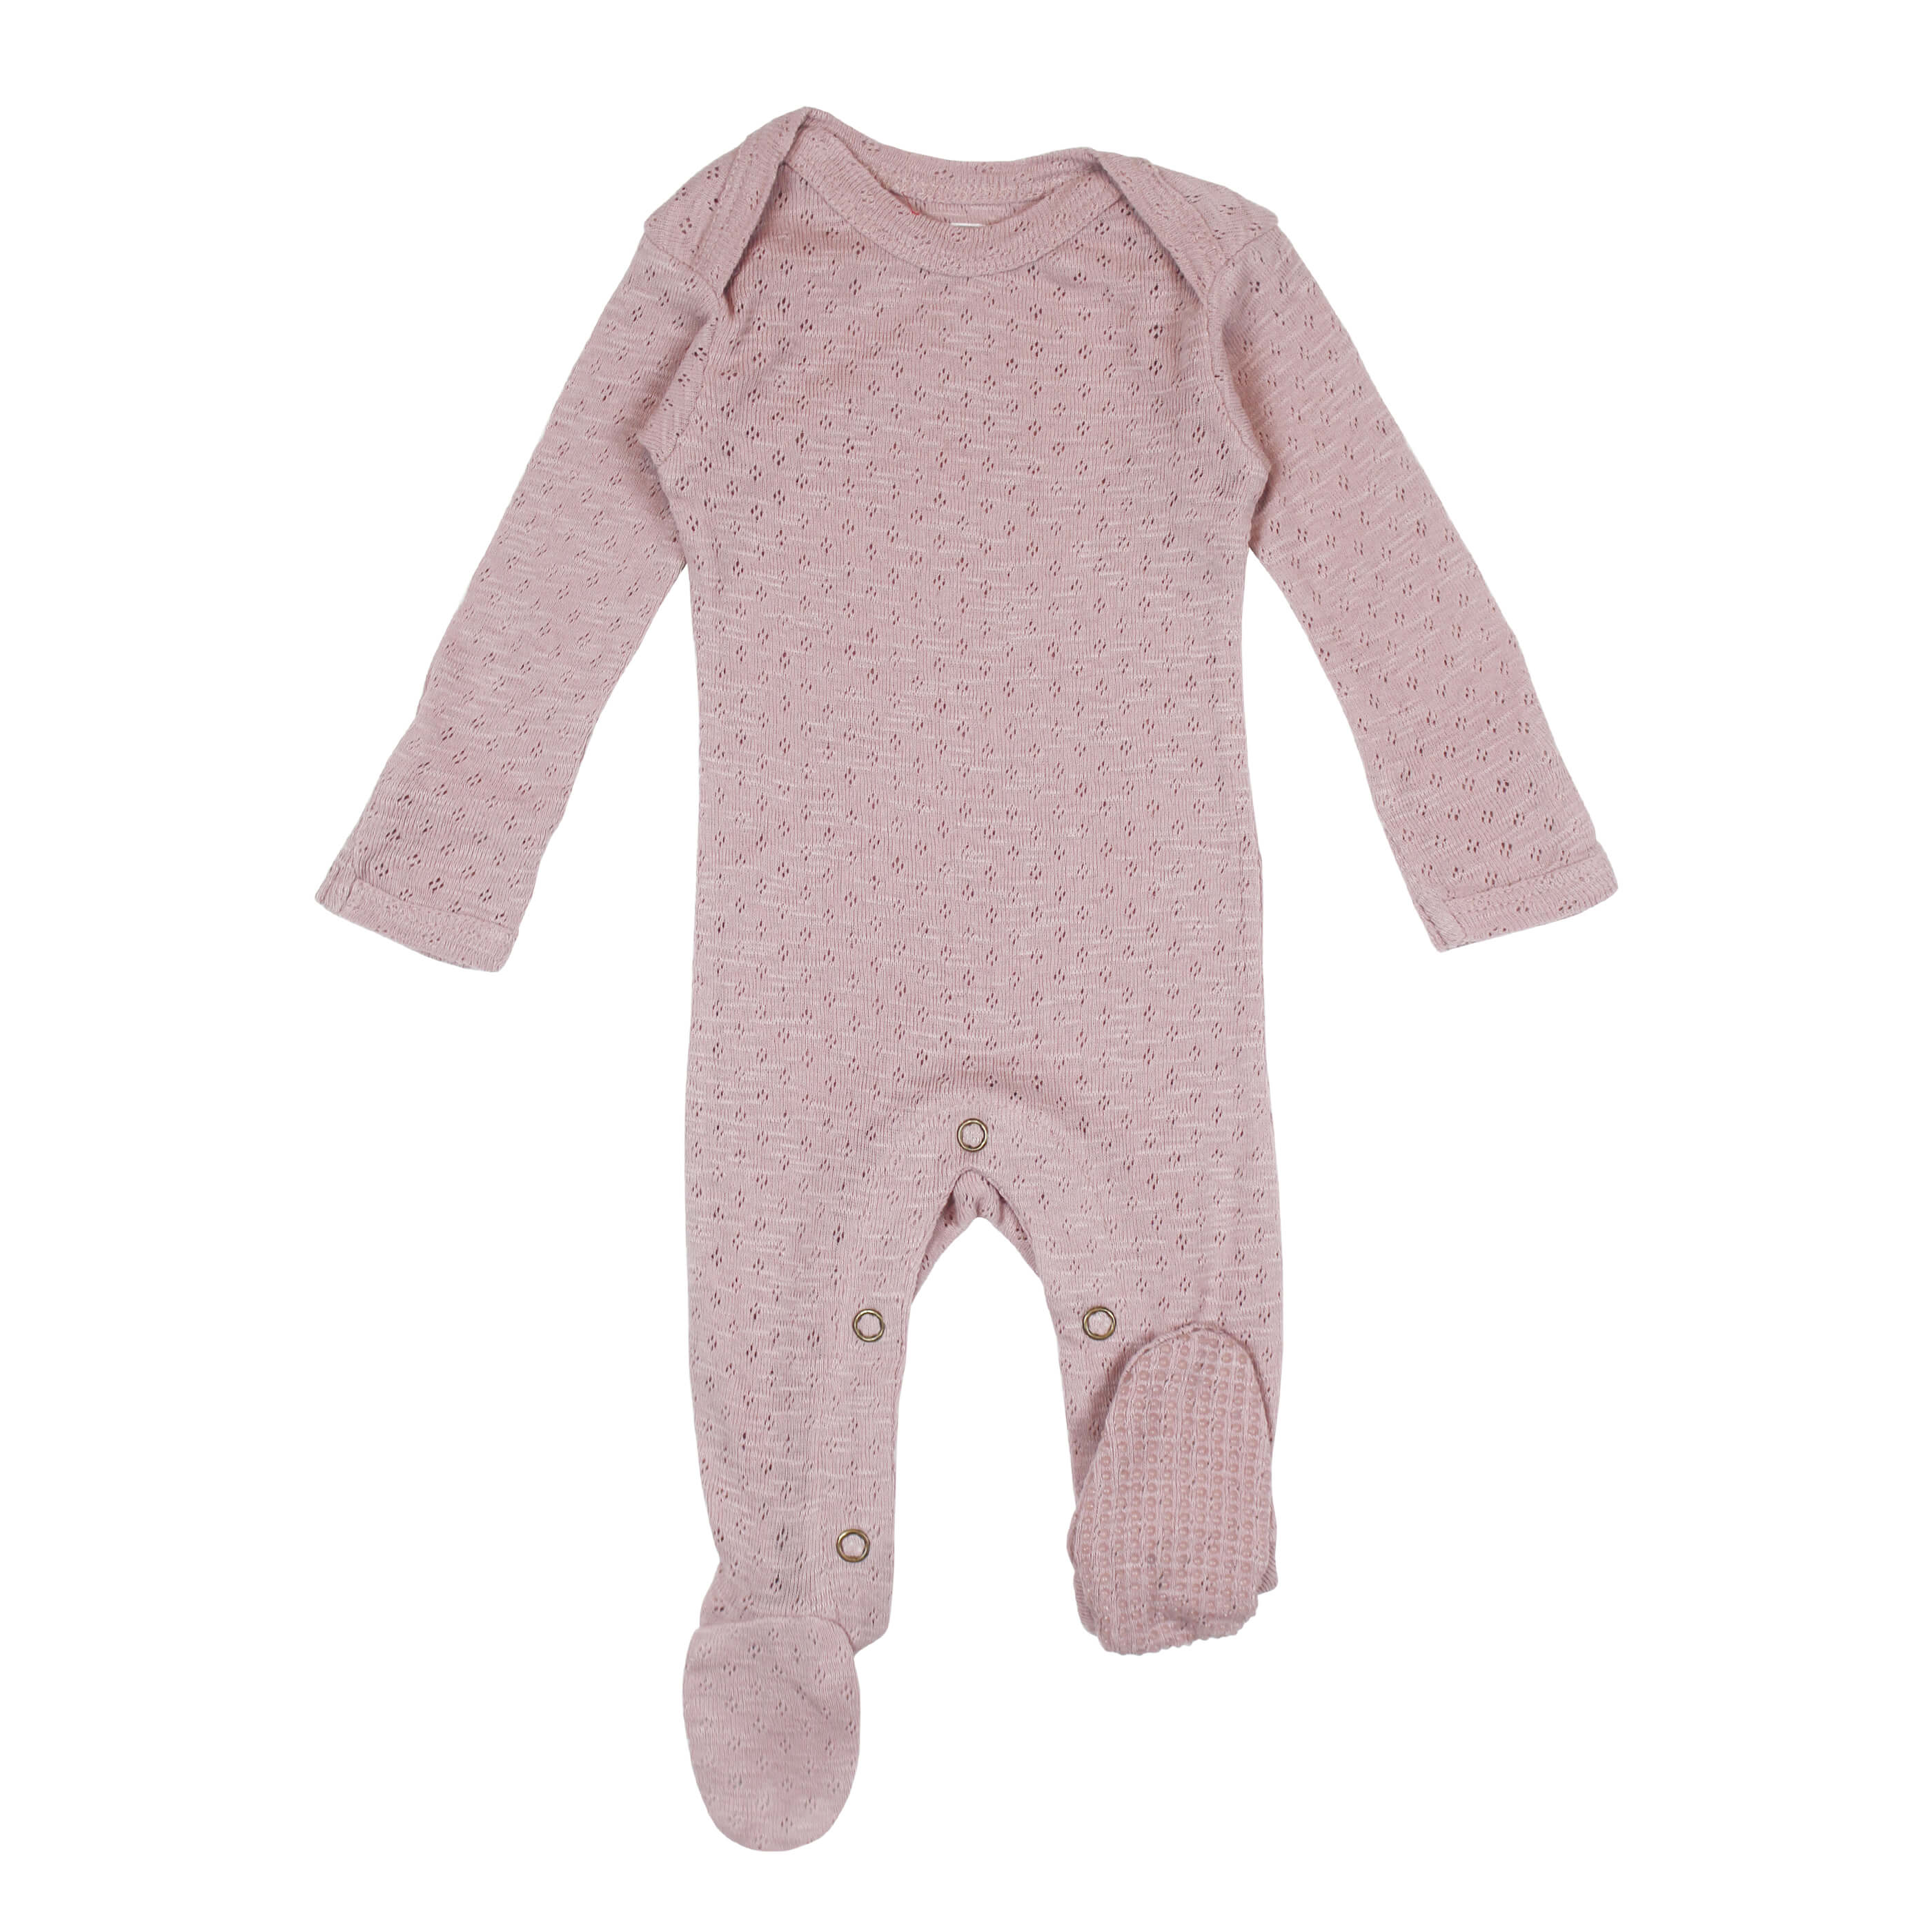 Pointelle Lap-Shoulder Baby Footie in Thistle